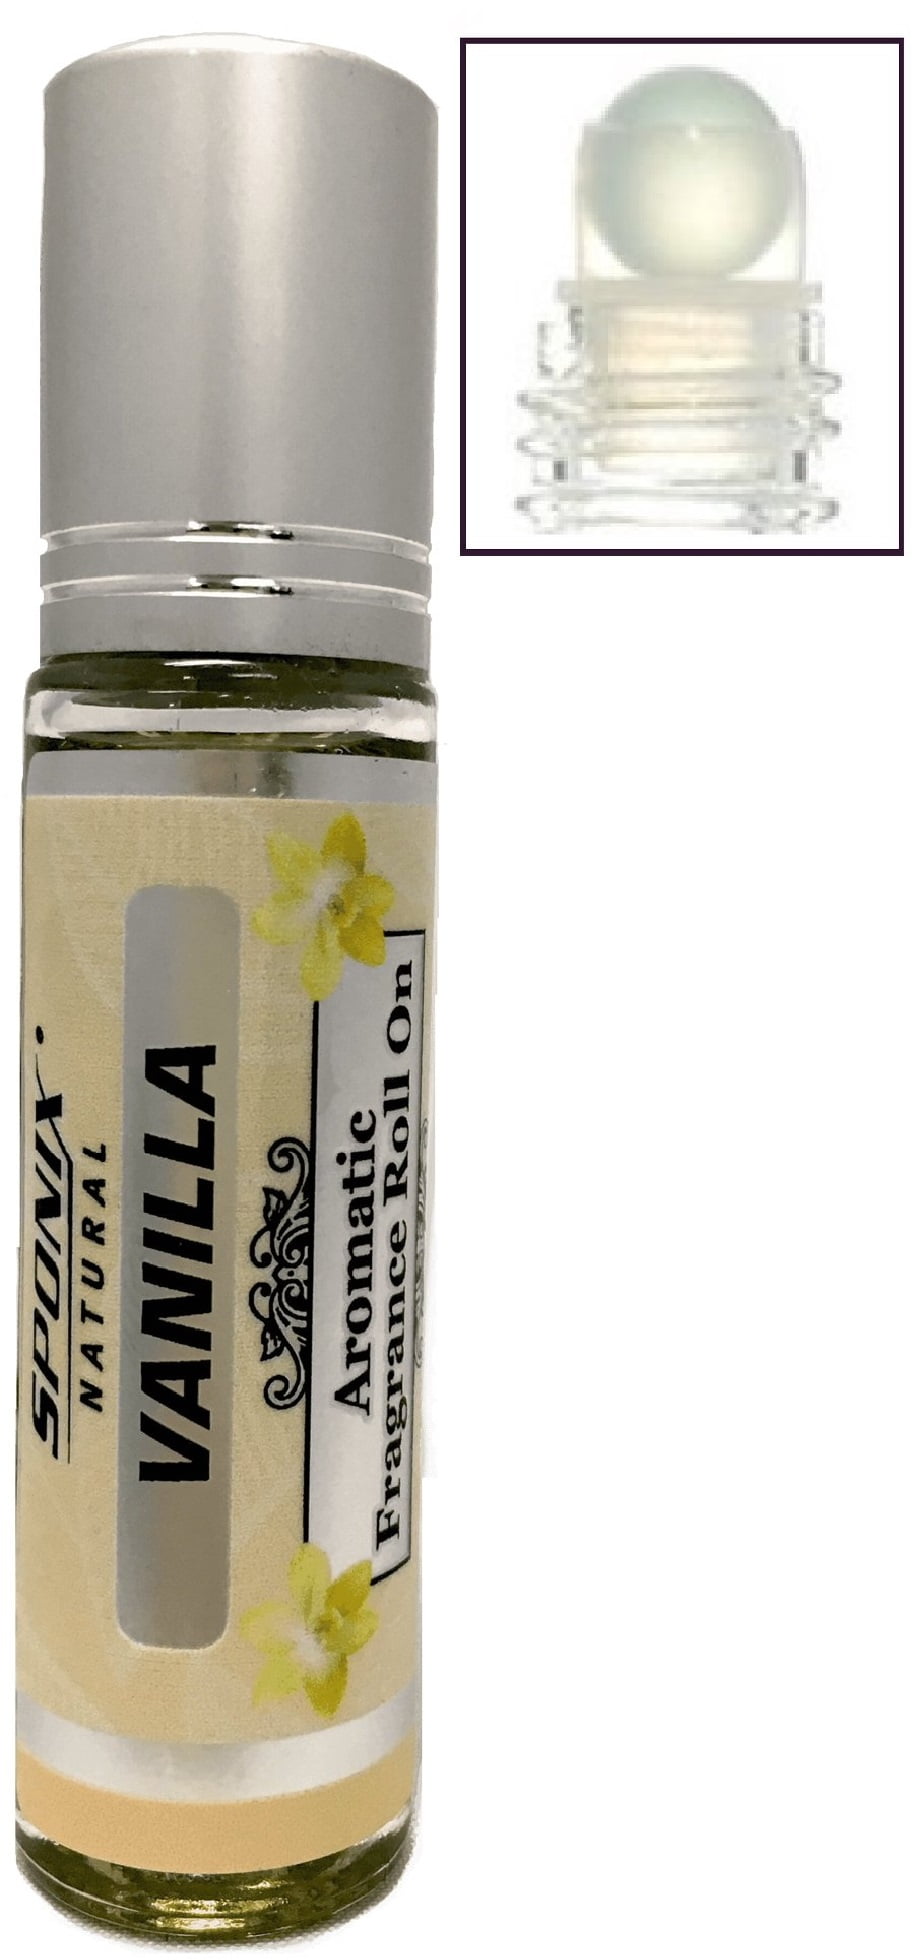 Vanilla Fragrance Oil Roll On Aromatic Vanilla Scented Perfume Oil 100%  Pure Pre-Diluted 10 mL by Sponix Made in USA (FAST SHIPPING)